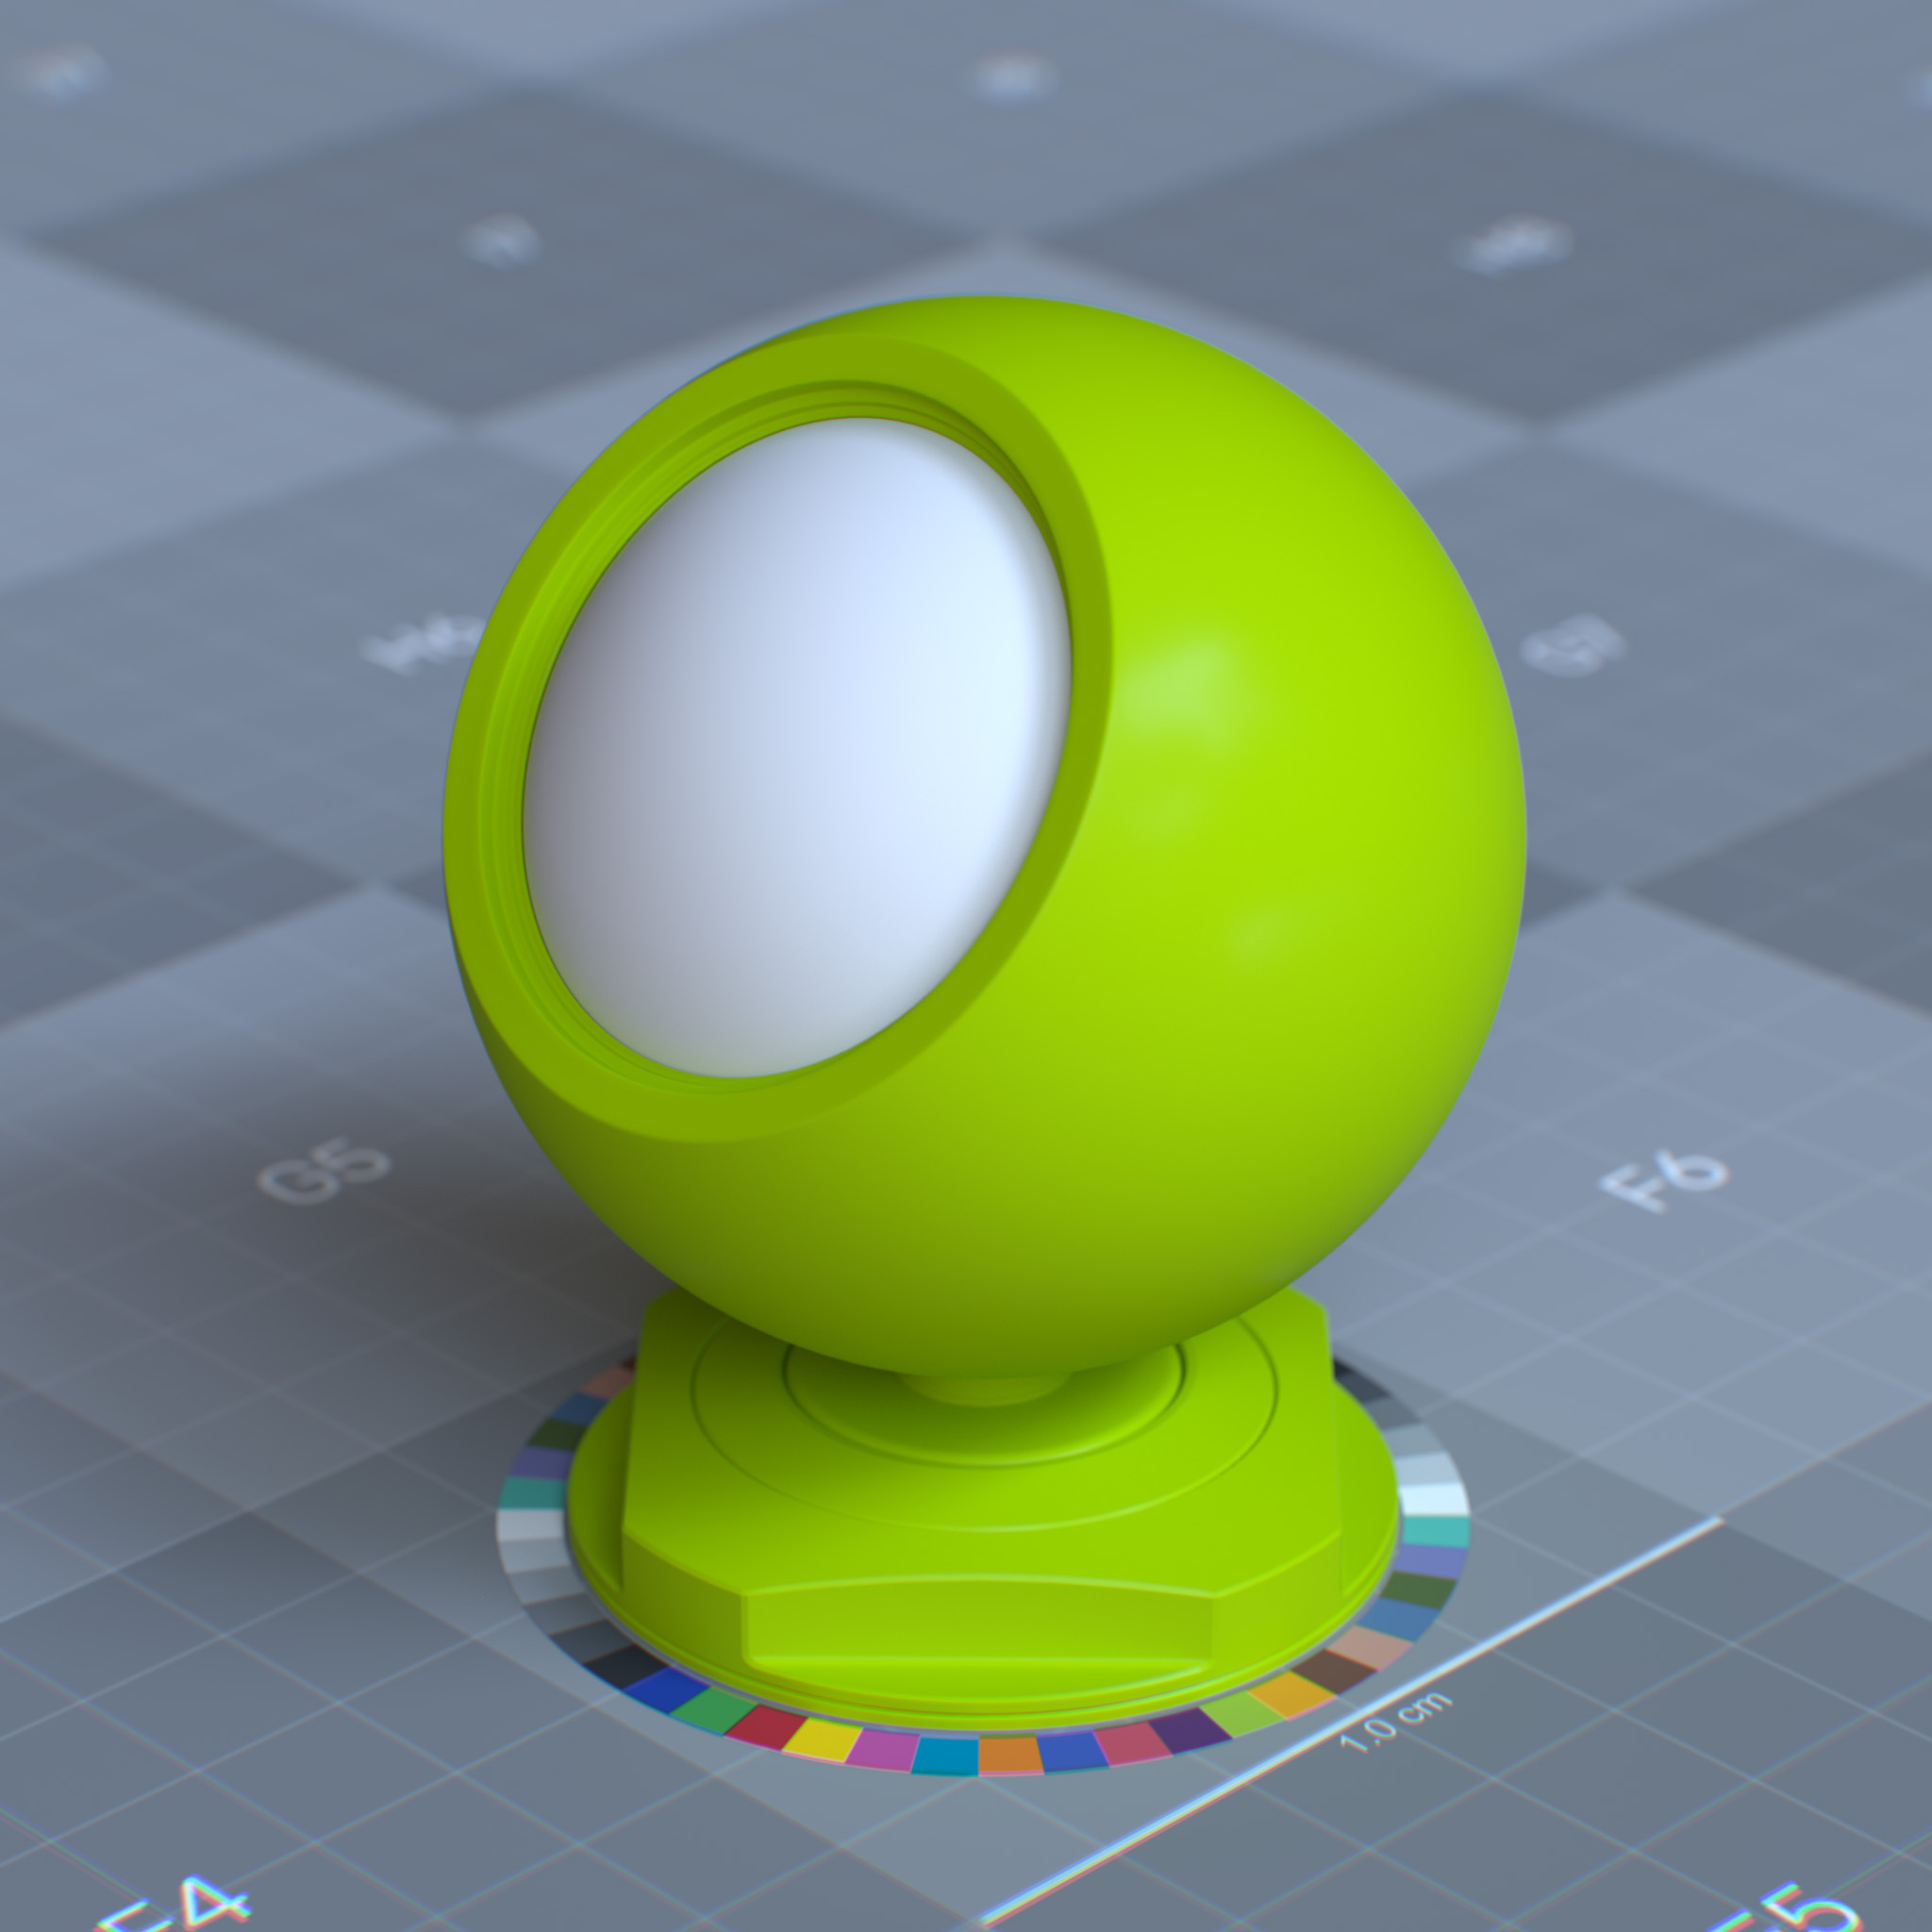 rtx_material_omnisurfacebase_diffuse_reflection_weight_1p0